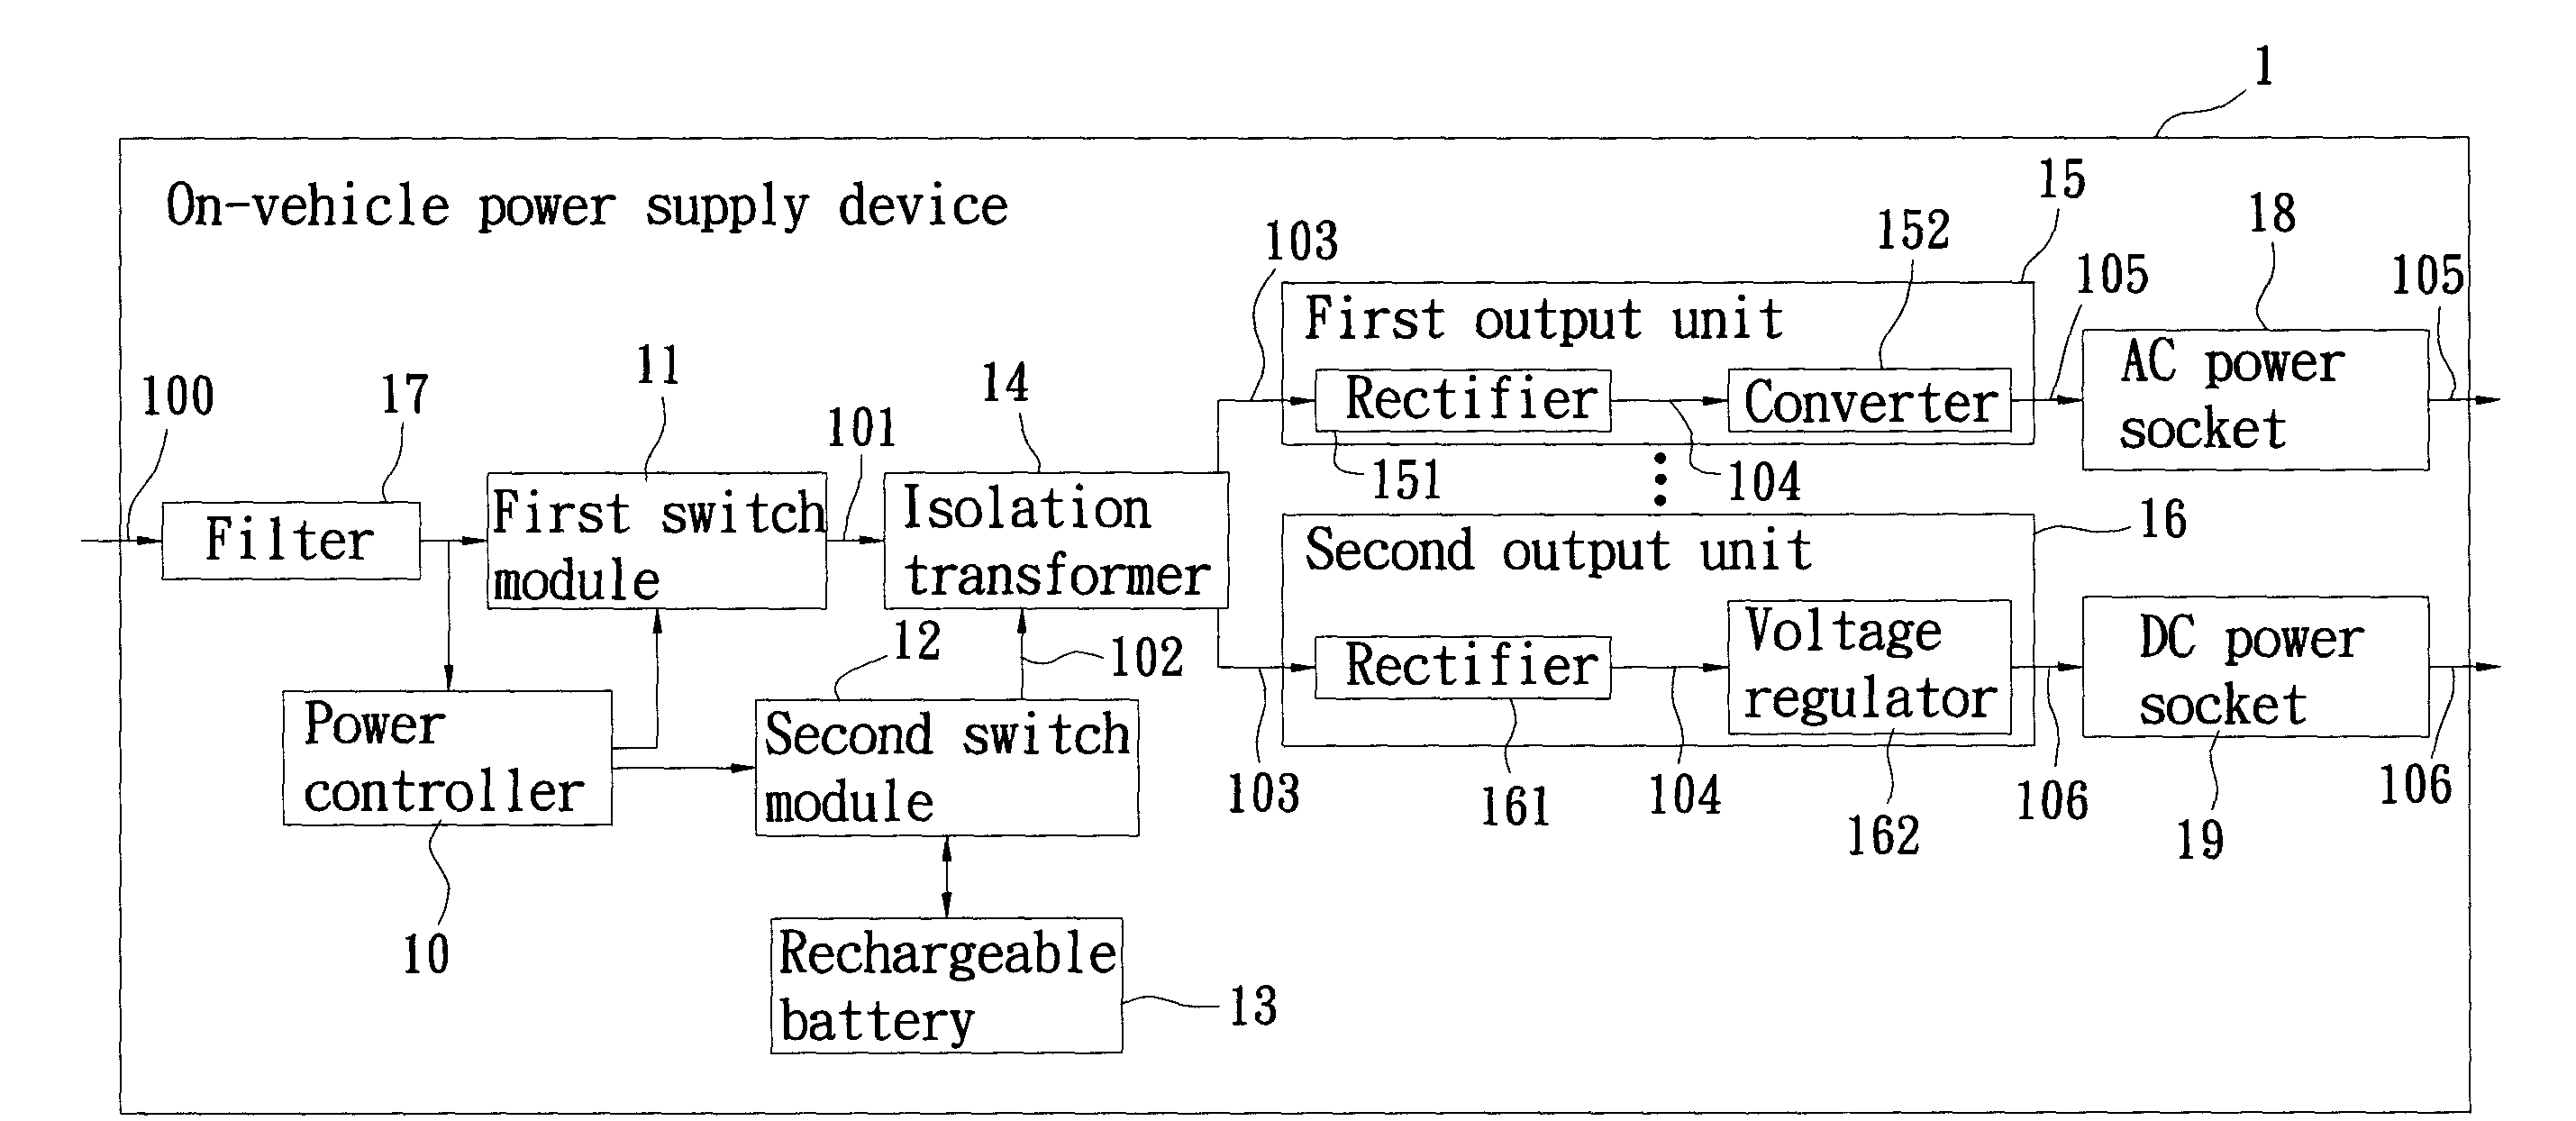 On-vehicle power supply device